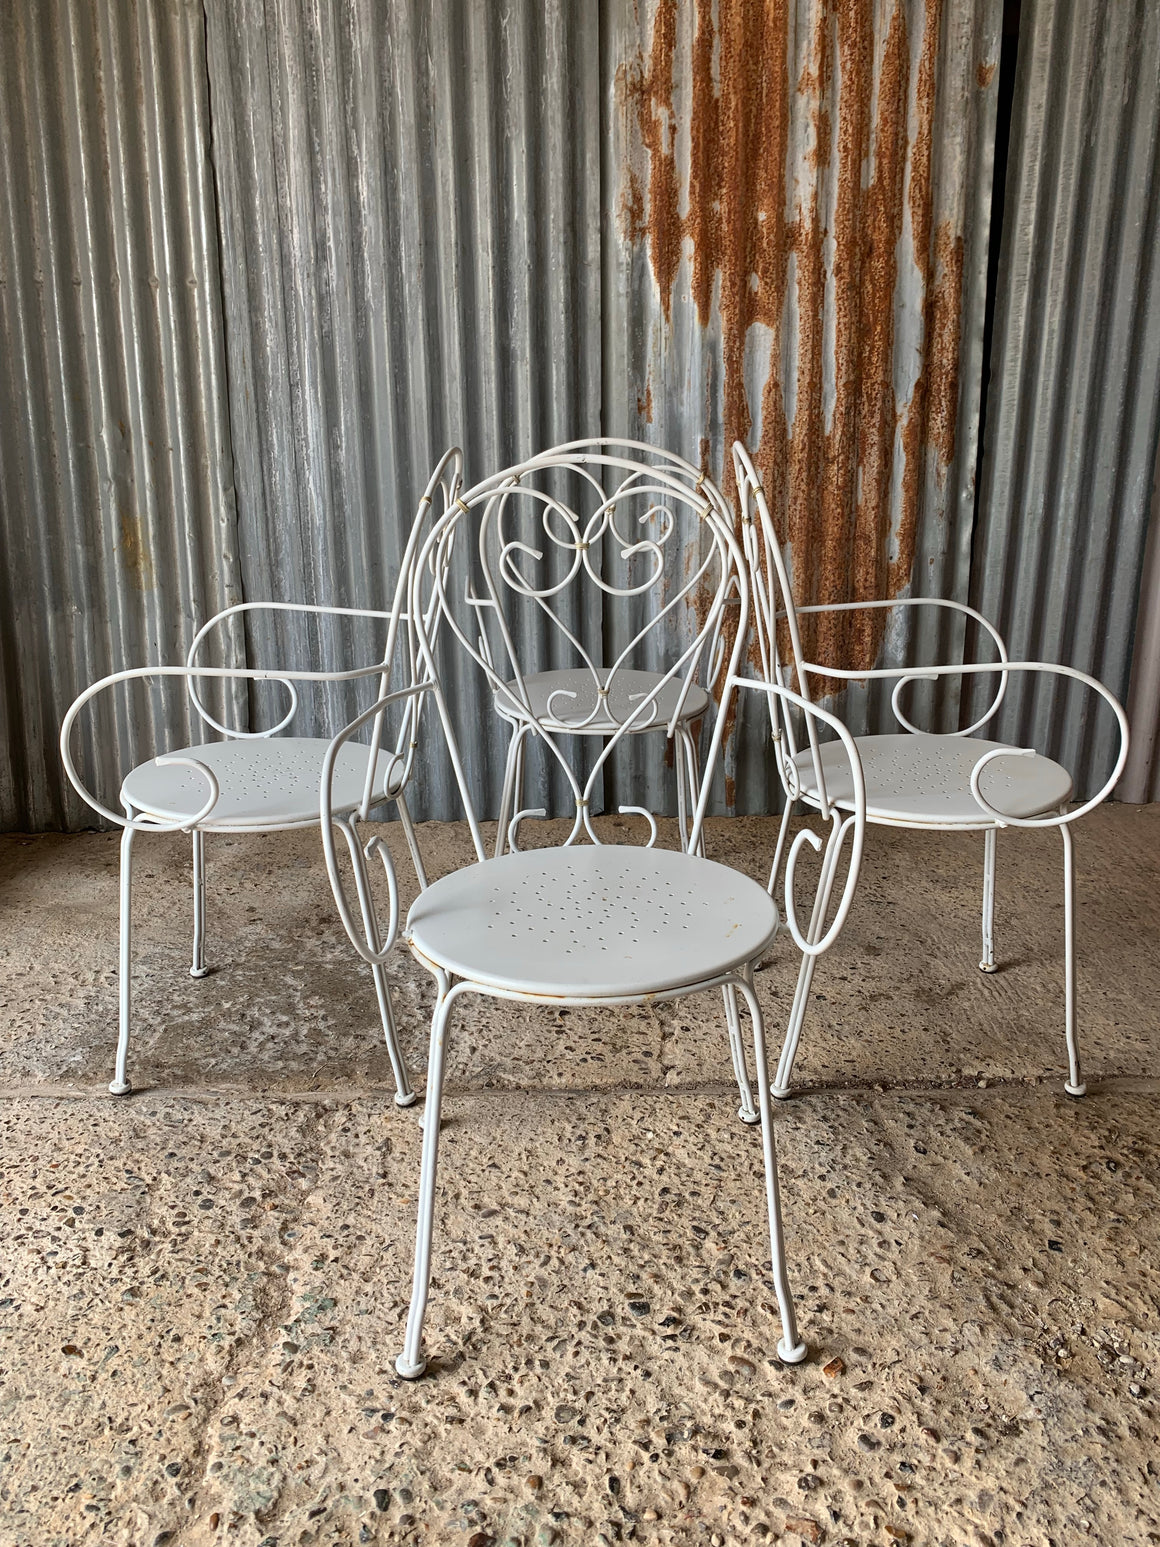 A set of four French white wire work garden chairs